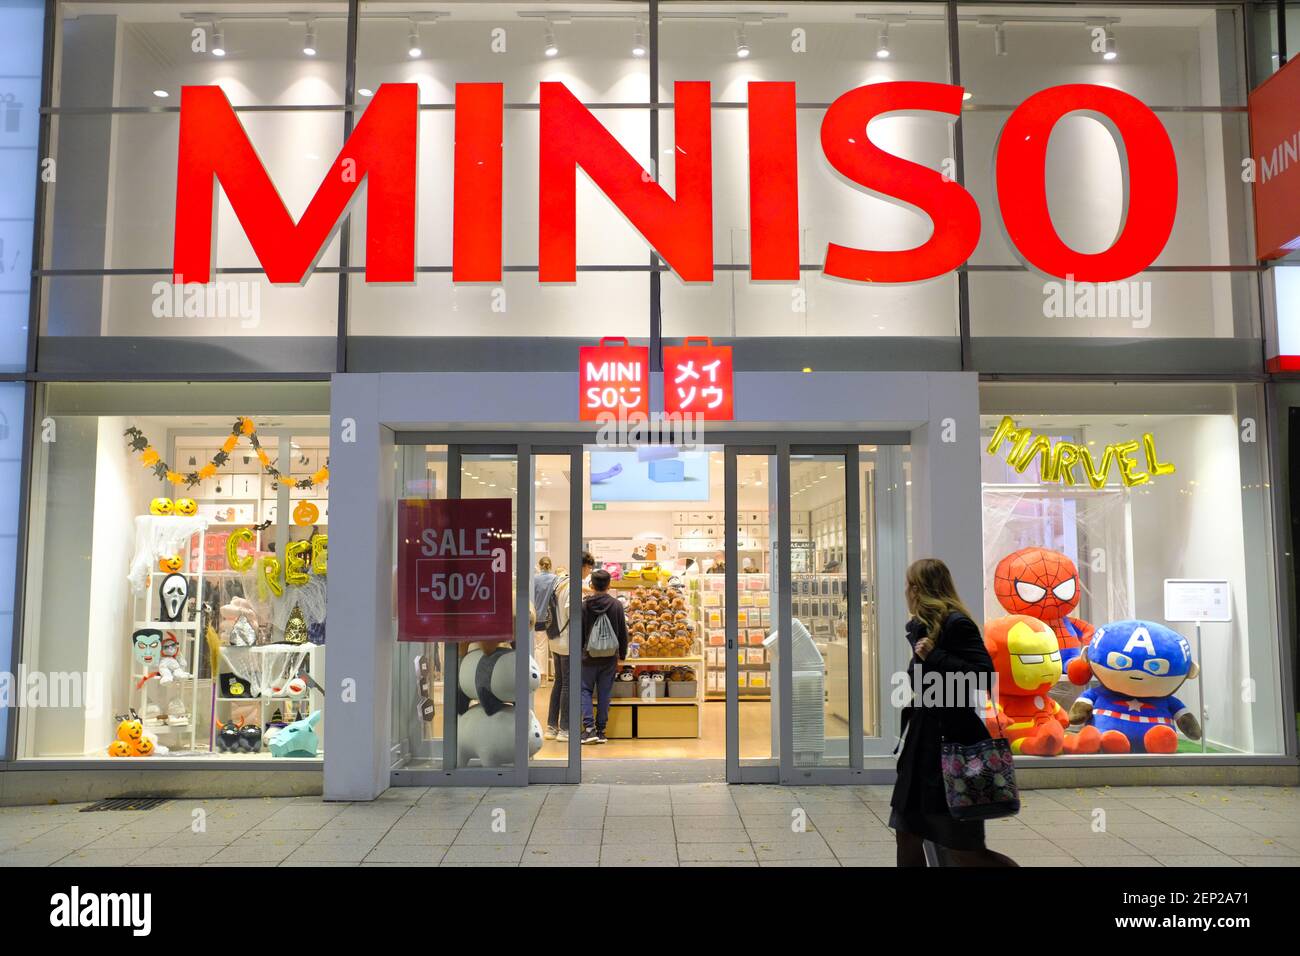 A Miniso store is seen in Warsaw, Poland on October 16, 2019